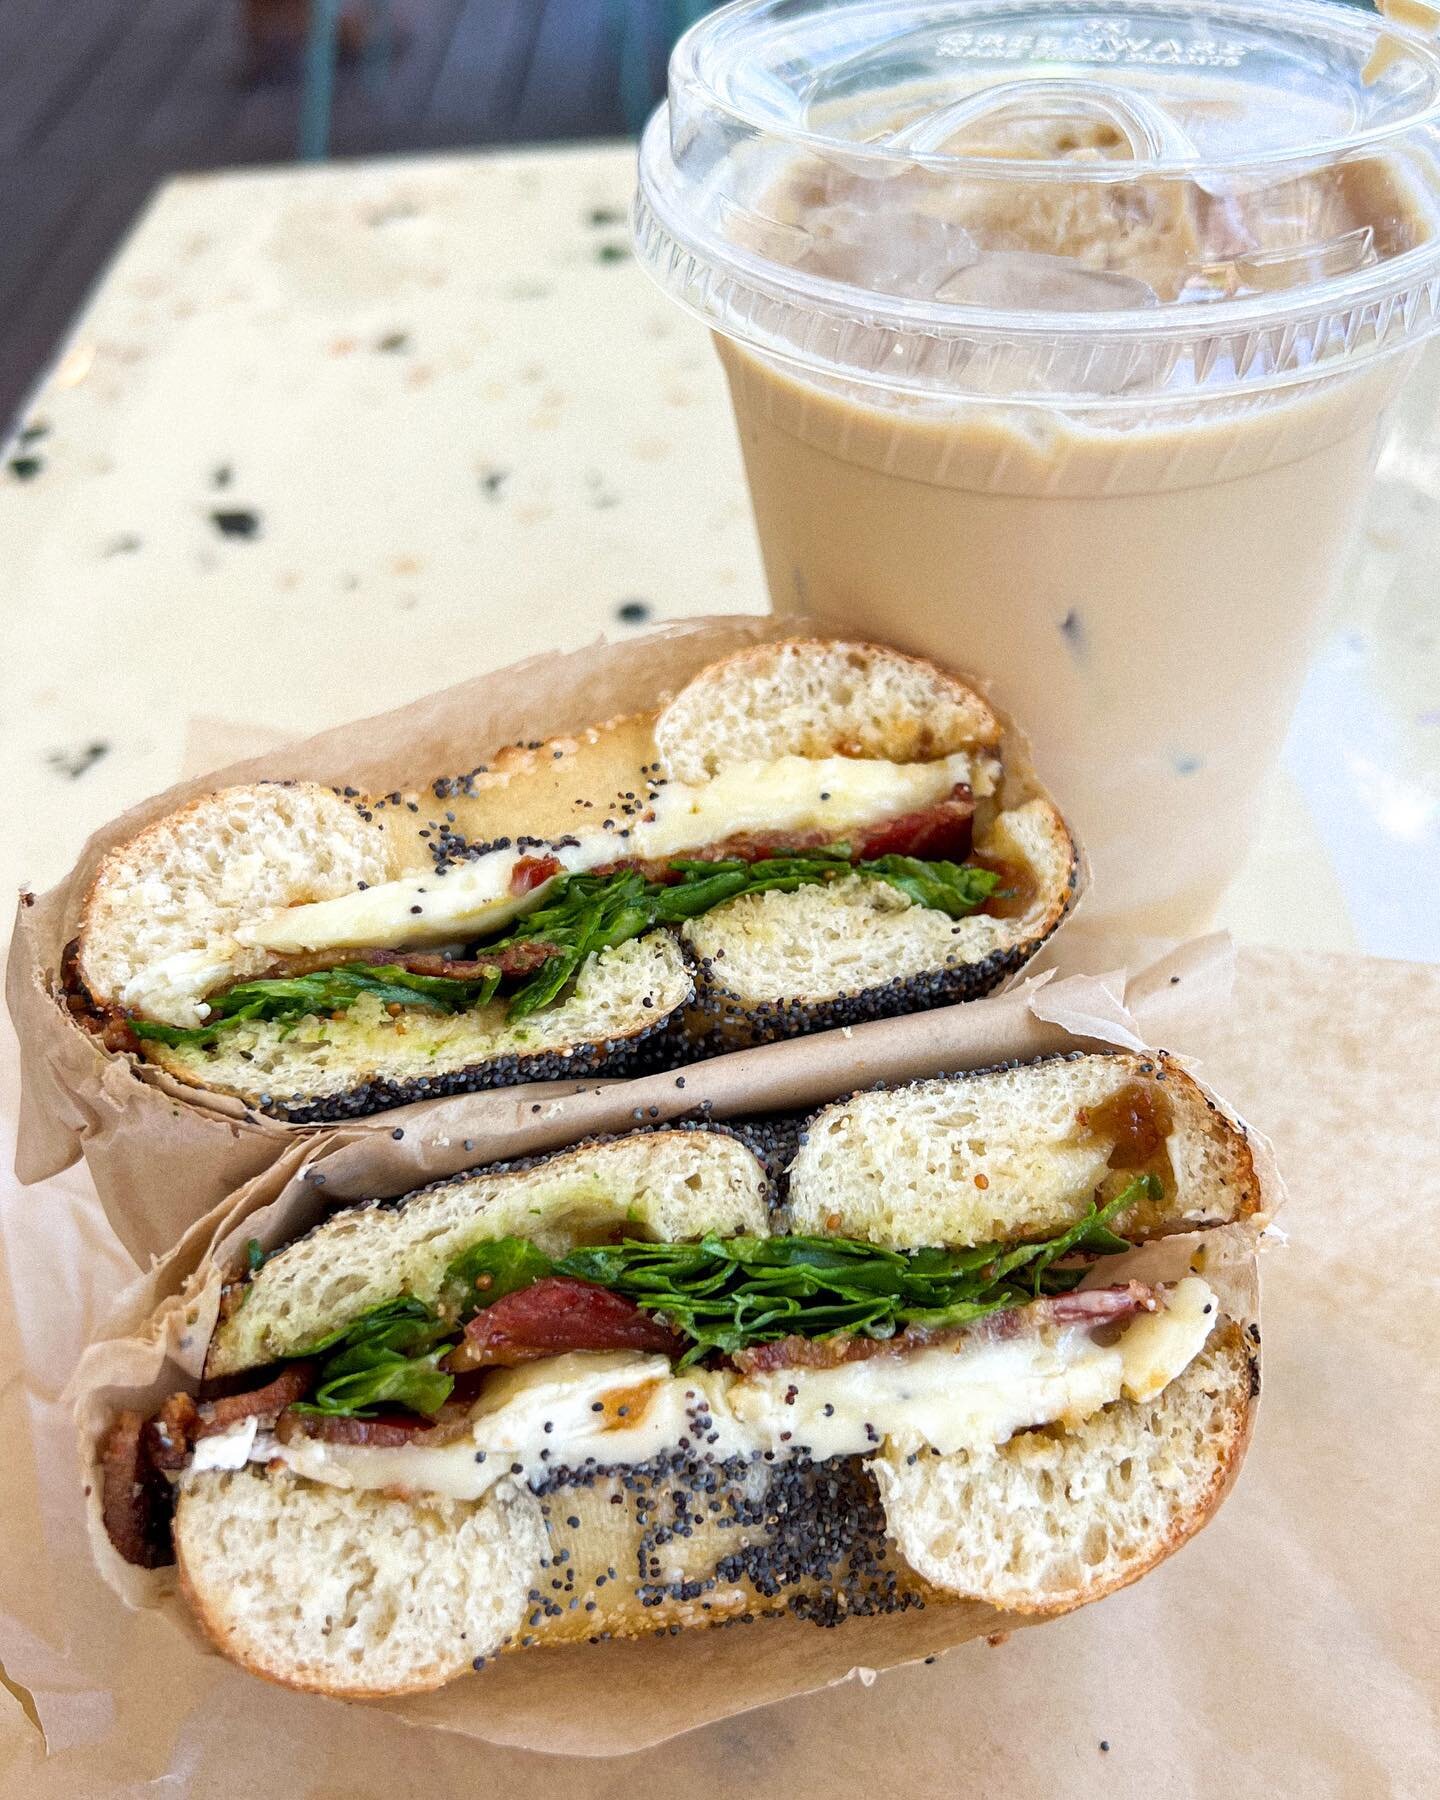 Love having a @petes_general in Tampa now! Such a great addition to Ybor with both indoor &amp; outdoor seating 🥯☕️ 

Recently had The Fancy Pete for the first time with Brie cheese, fig jam, @theboozypig bacon, and orange Dijon-dressed arugula 😋 
